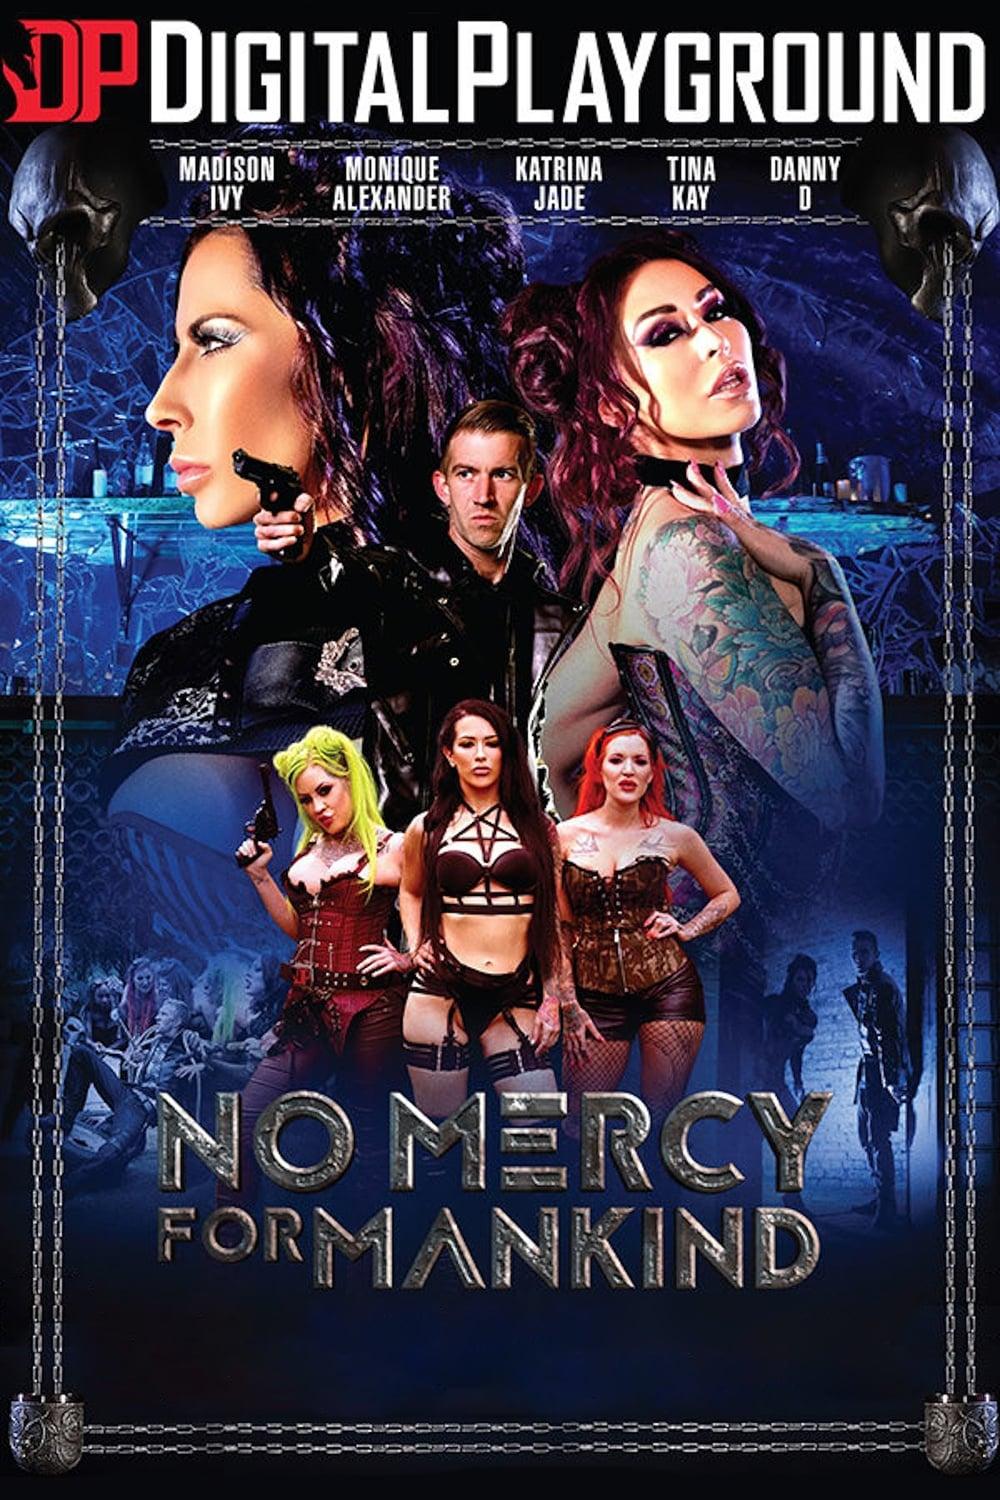 No Mercy For Mankind poster